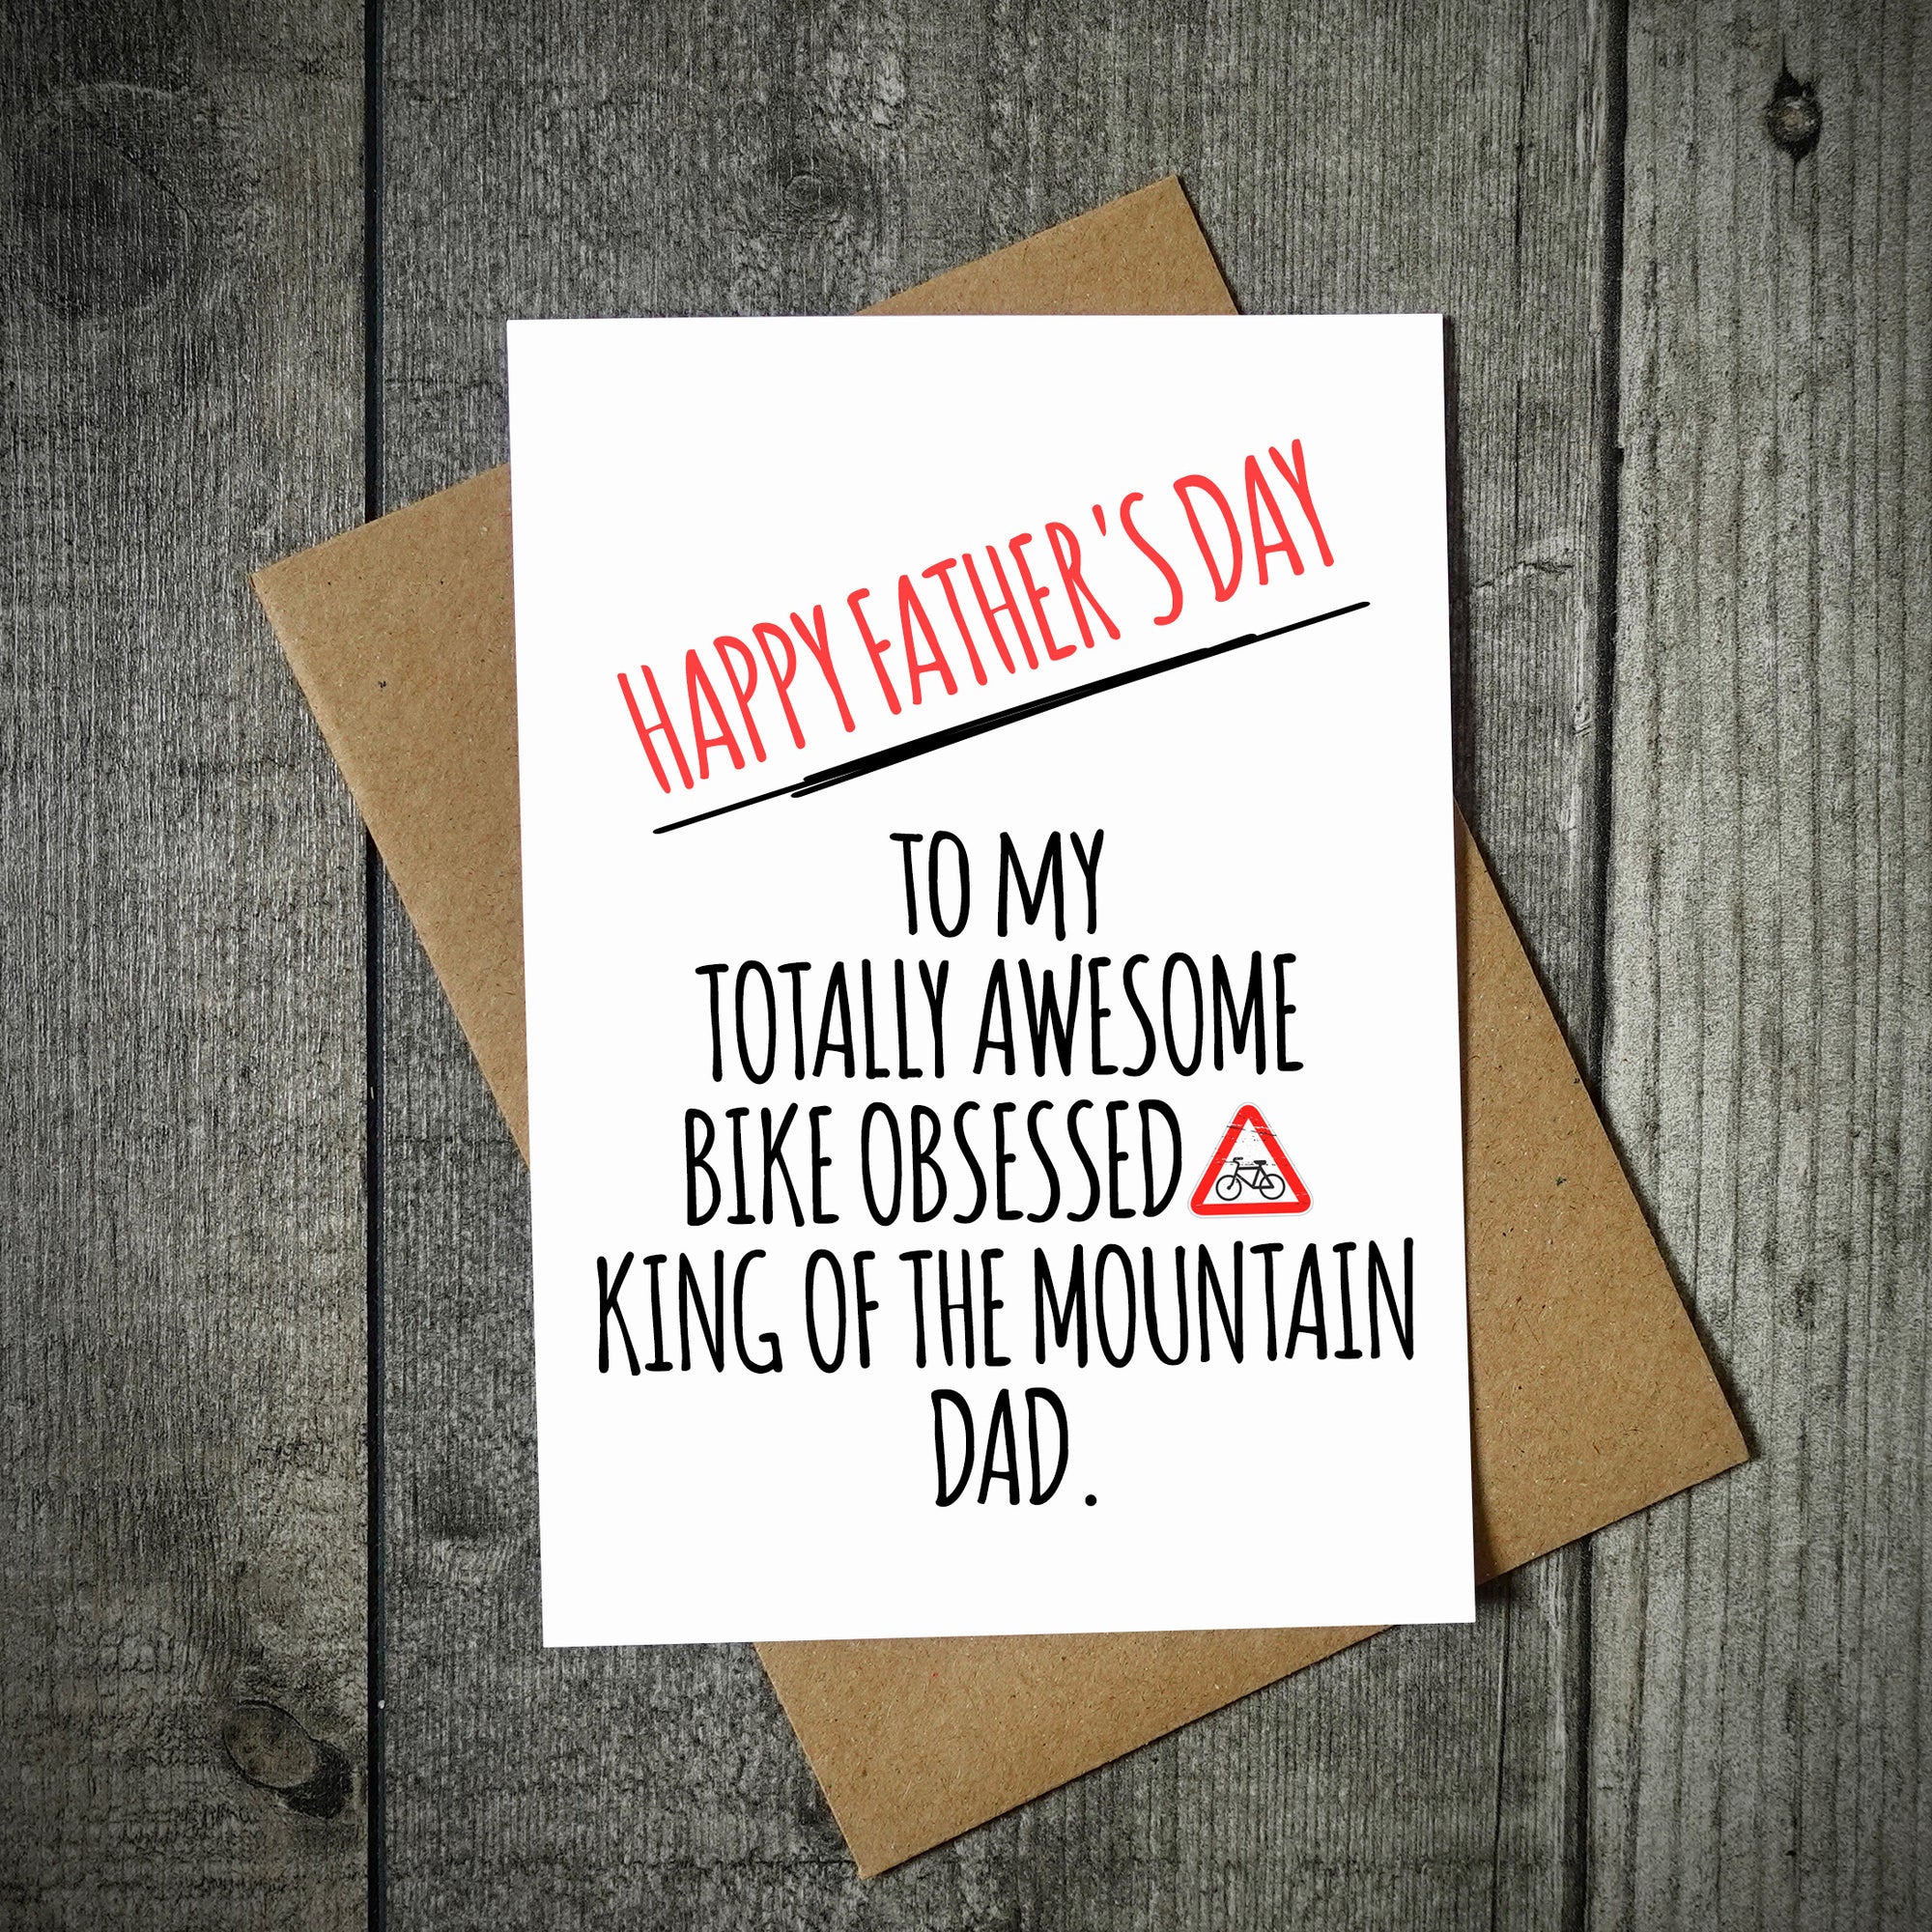 Happy Father's Day Card To My Totally Obsessed King Of The Mountain Dad